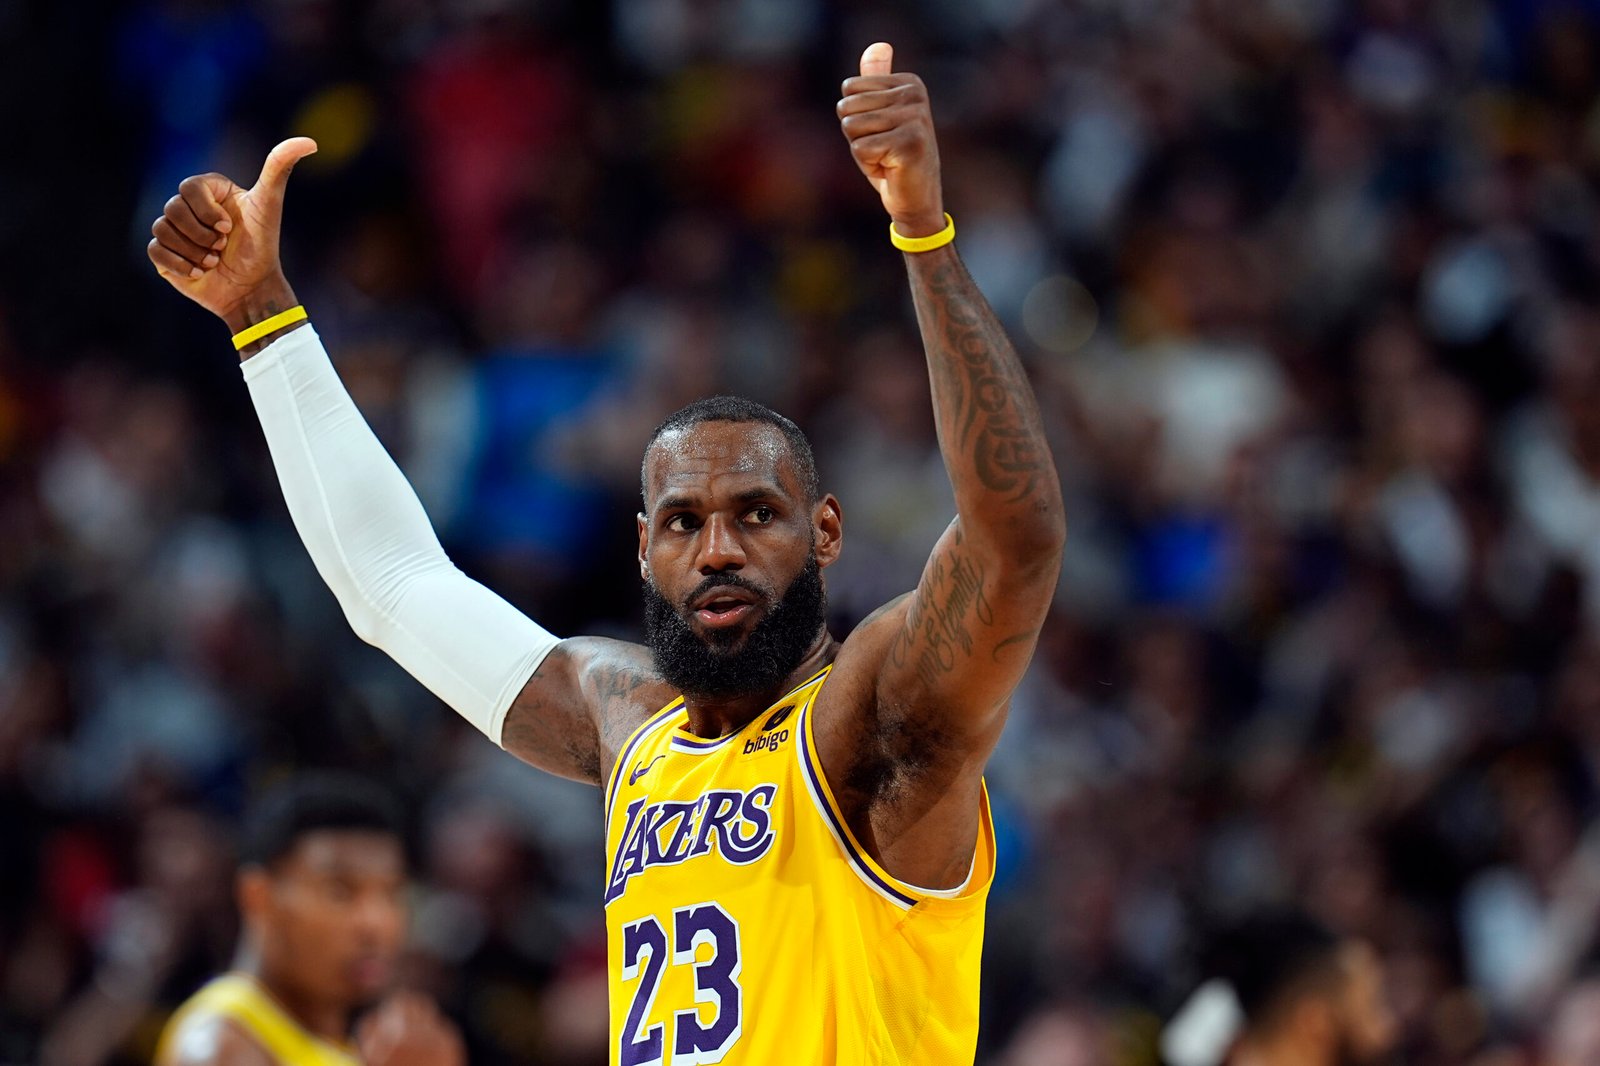 NBA: LeBron James intends to sign a new deal with Lakers